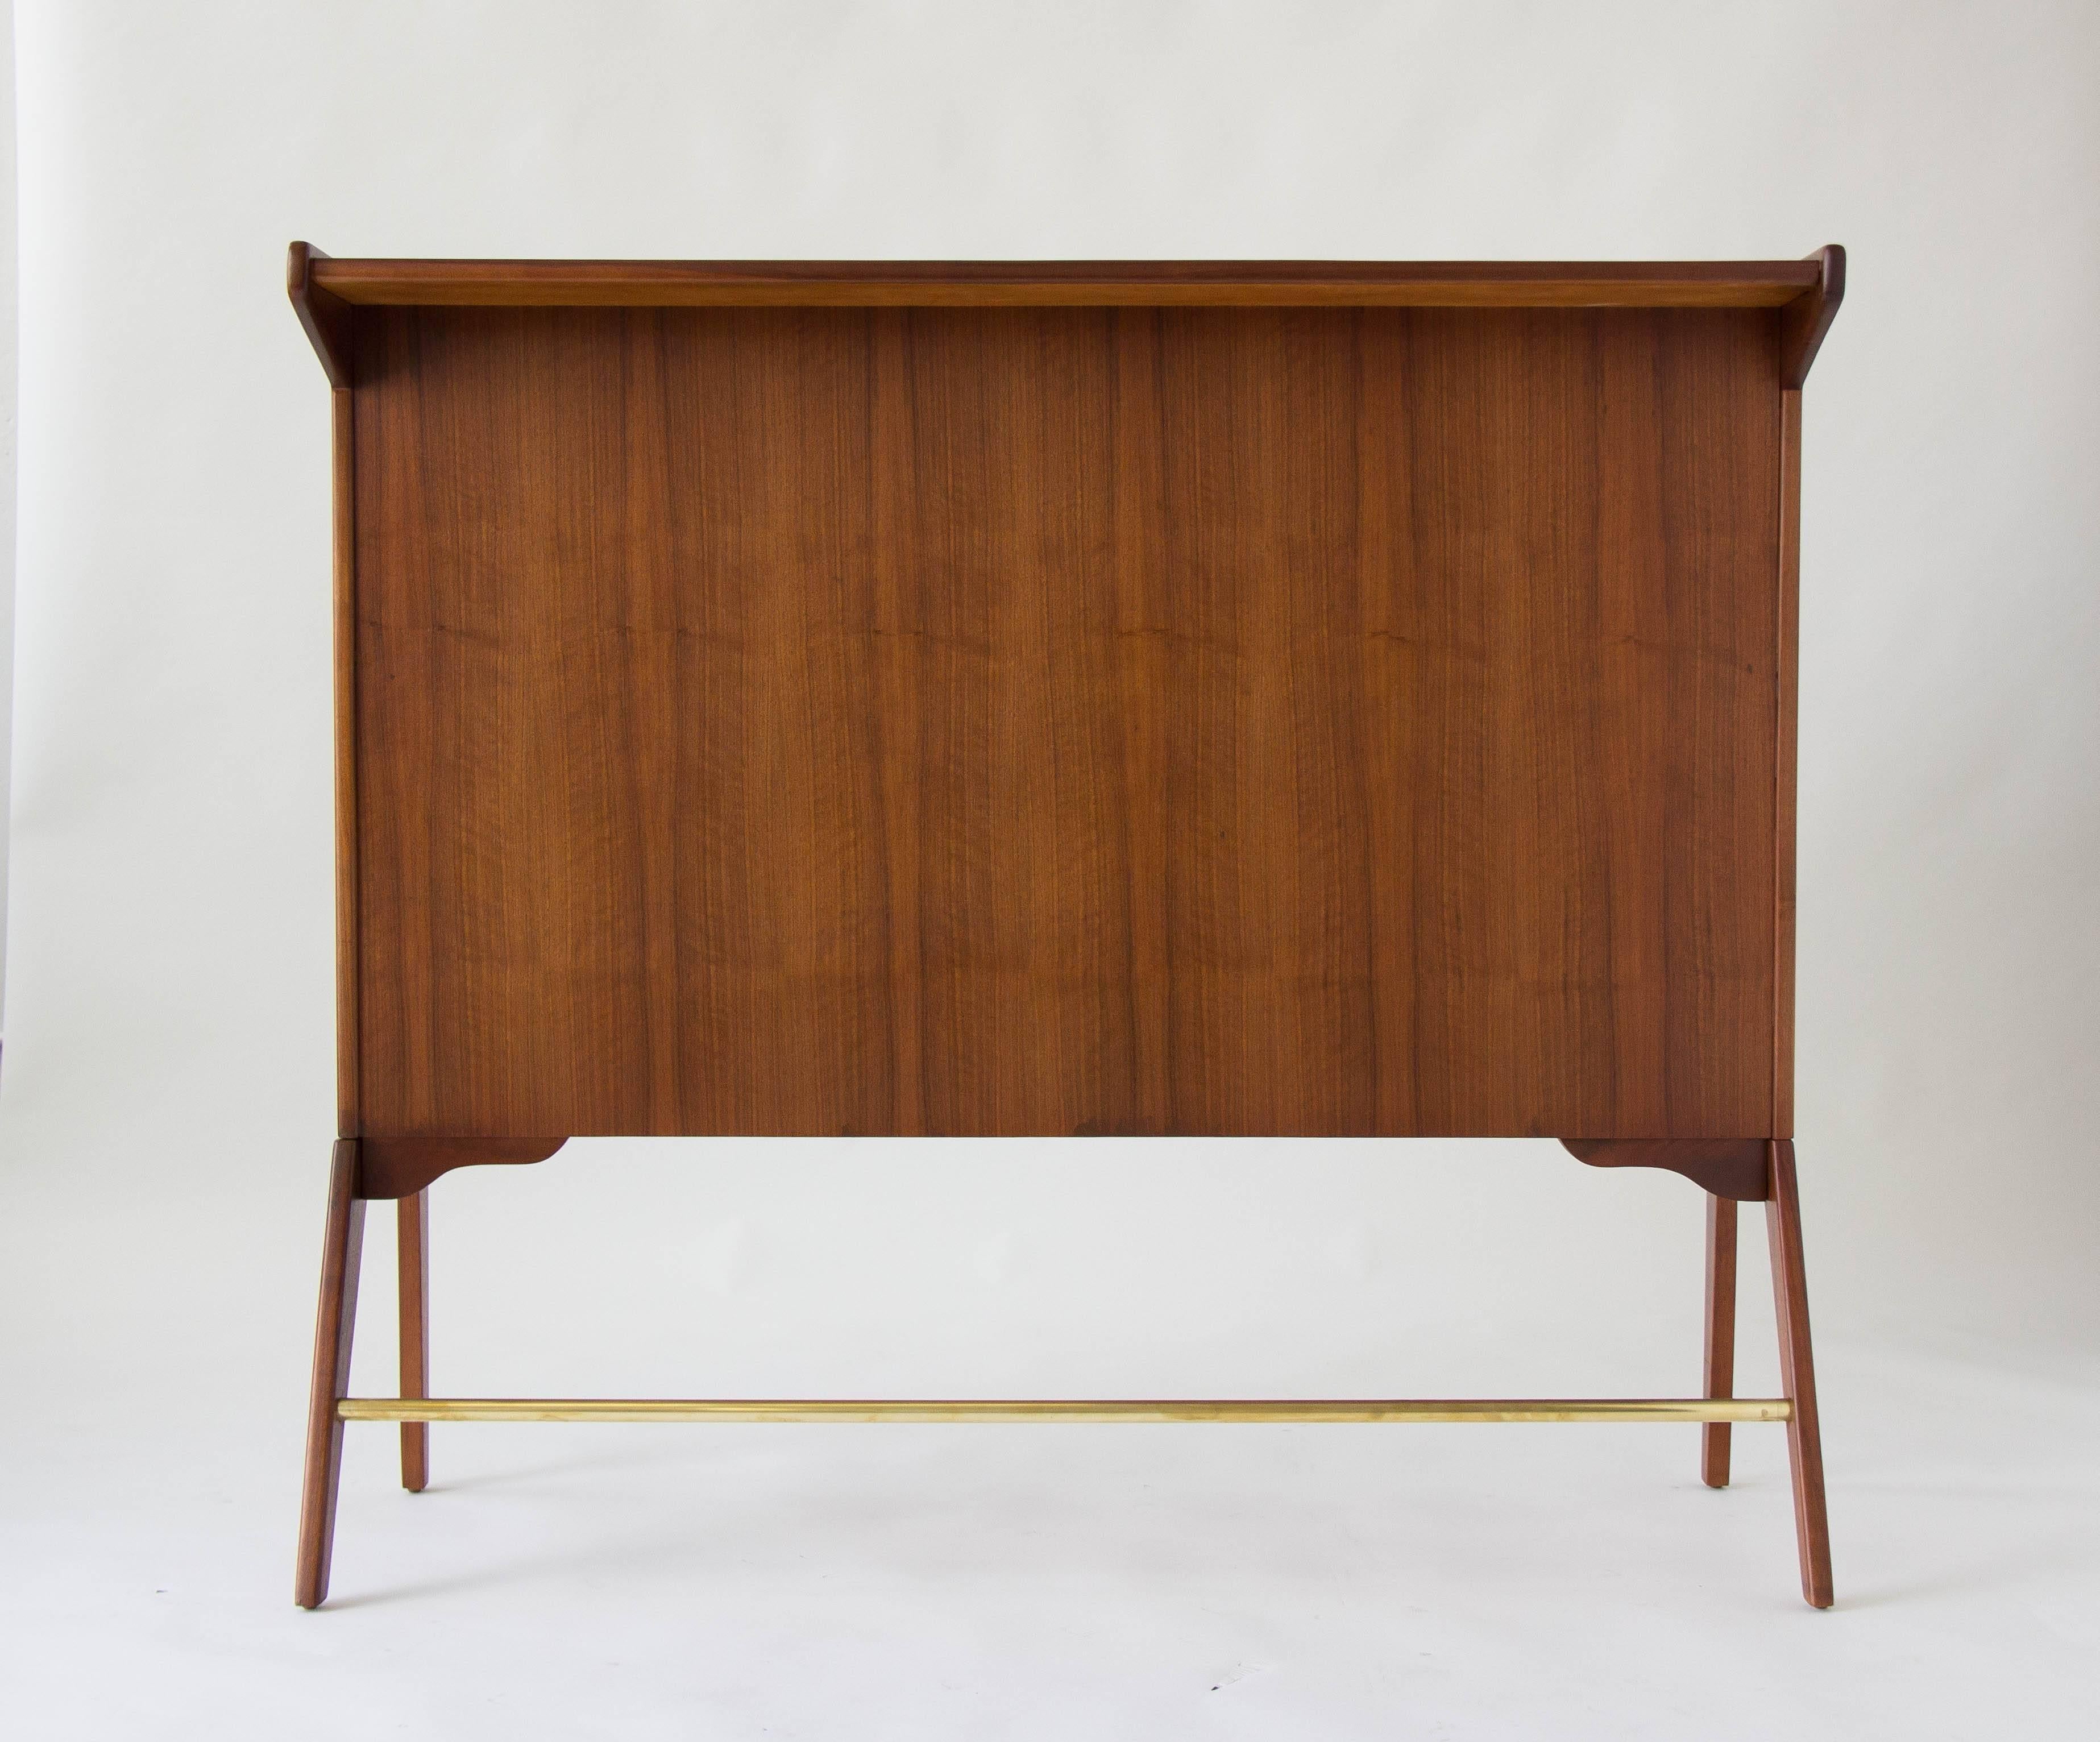 A high walnut serving bar with stylistically kicked-out front legs. The bar top has an overhang on the front-facing side and is open on the other side with a workspace and two storage compartments. A brass stretcher decorates the front of the piece